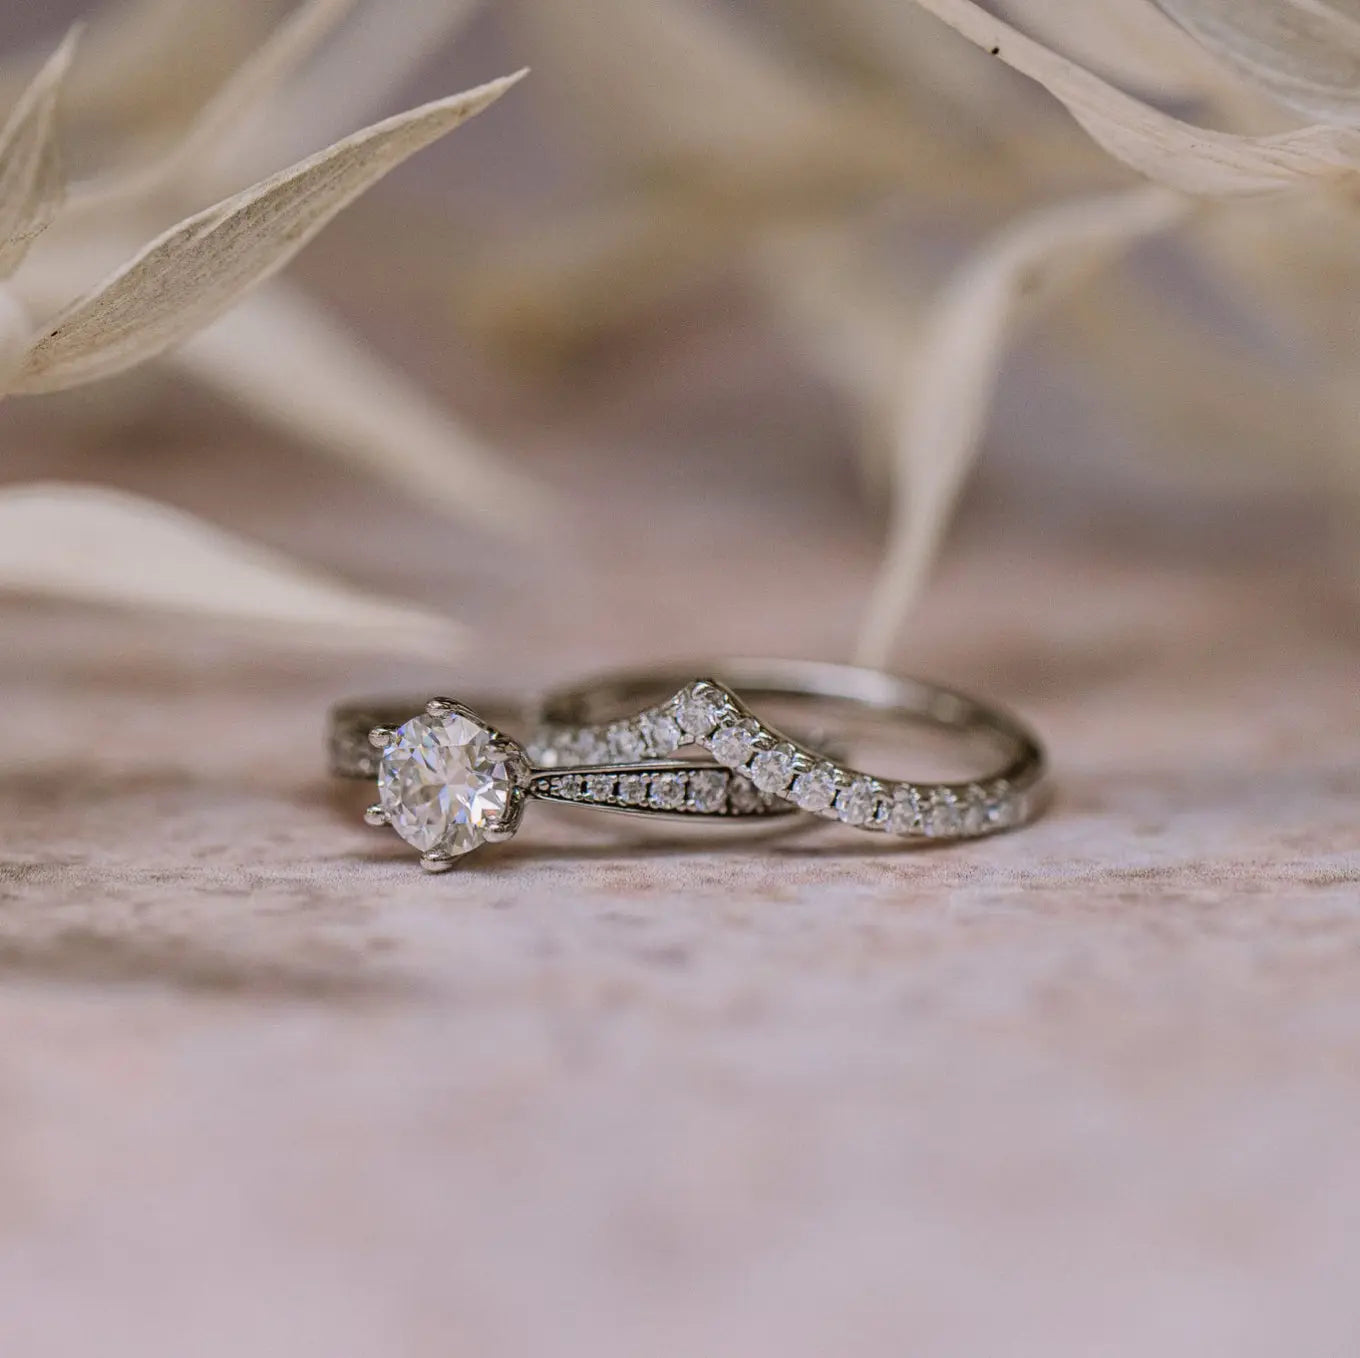 Make Your Move with Our Exquisite Moissanite Wedding Rings